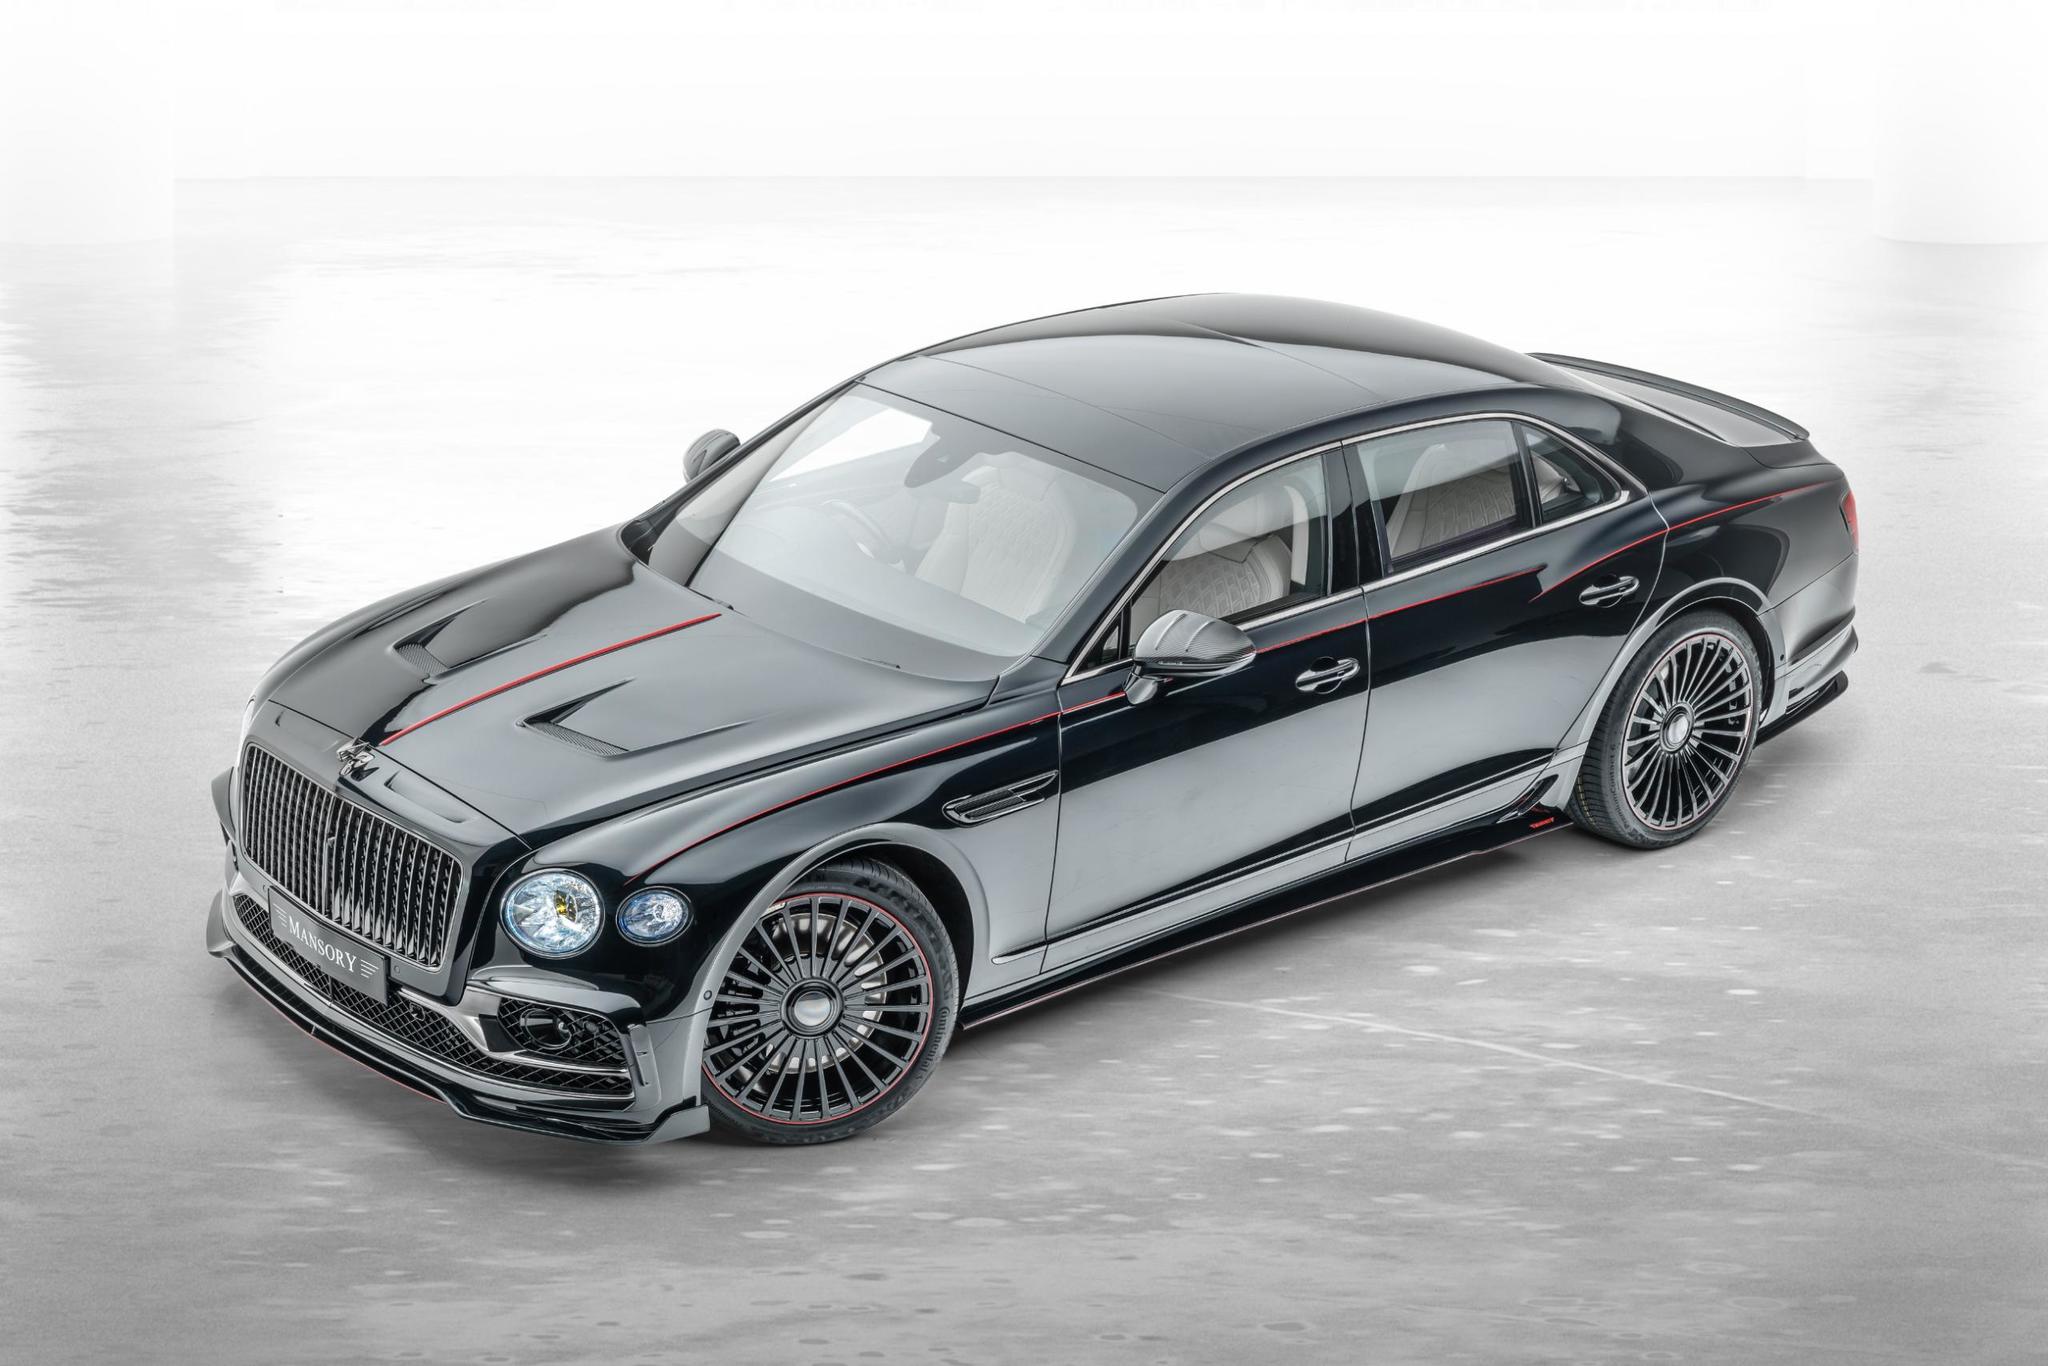 Mansory body kit for Bentley Flying Spur new style